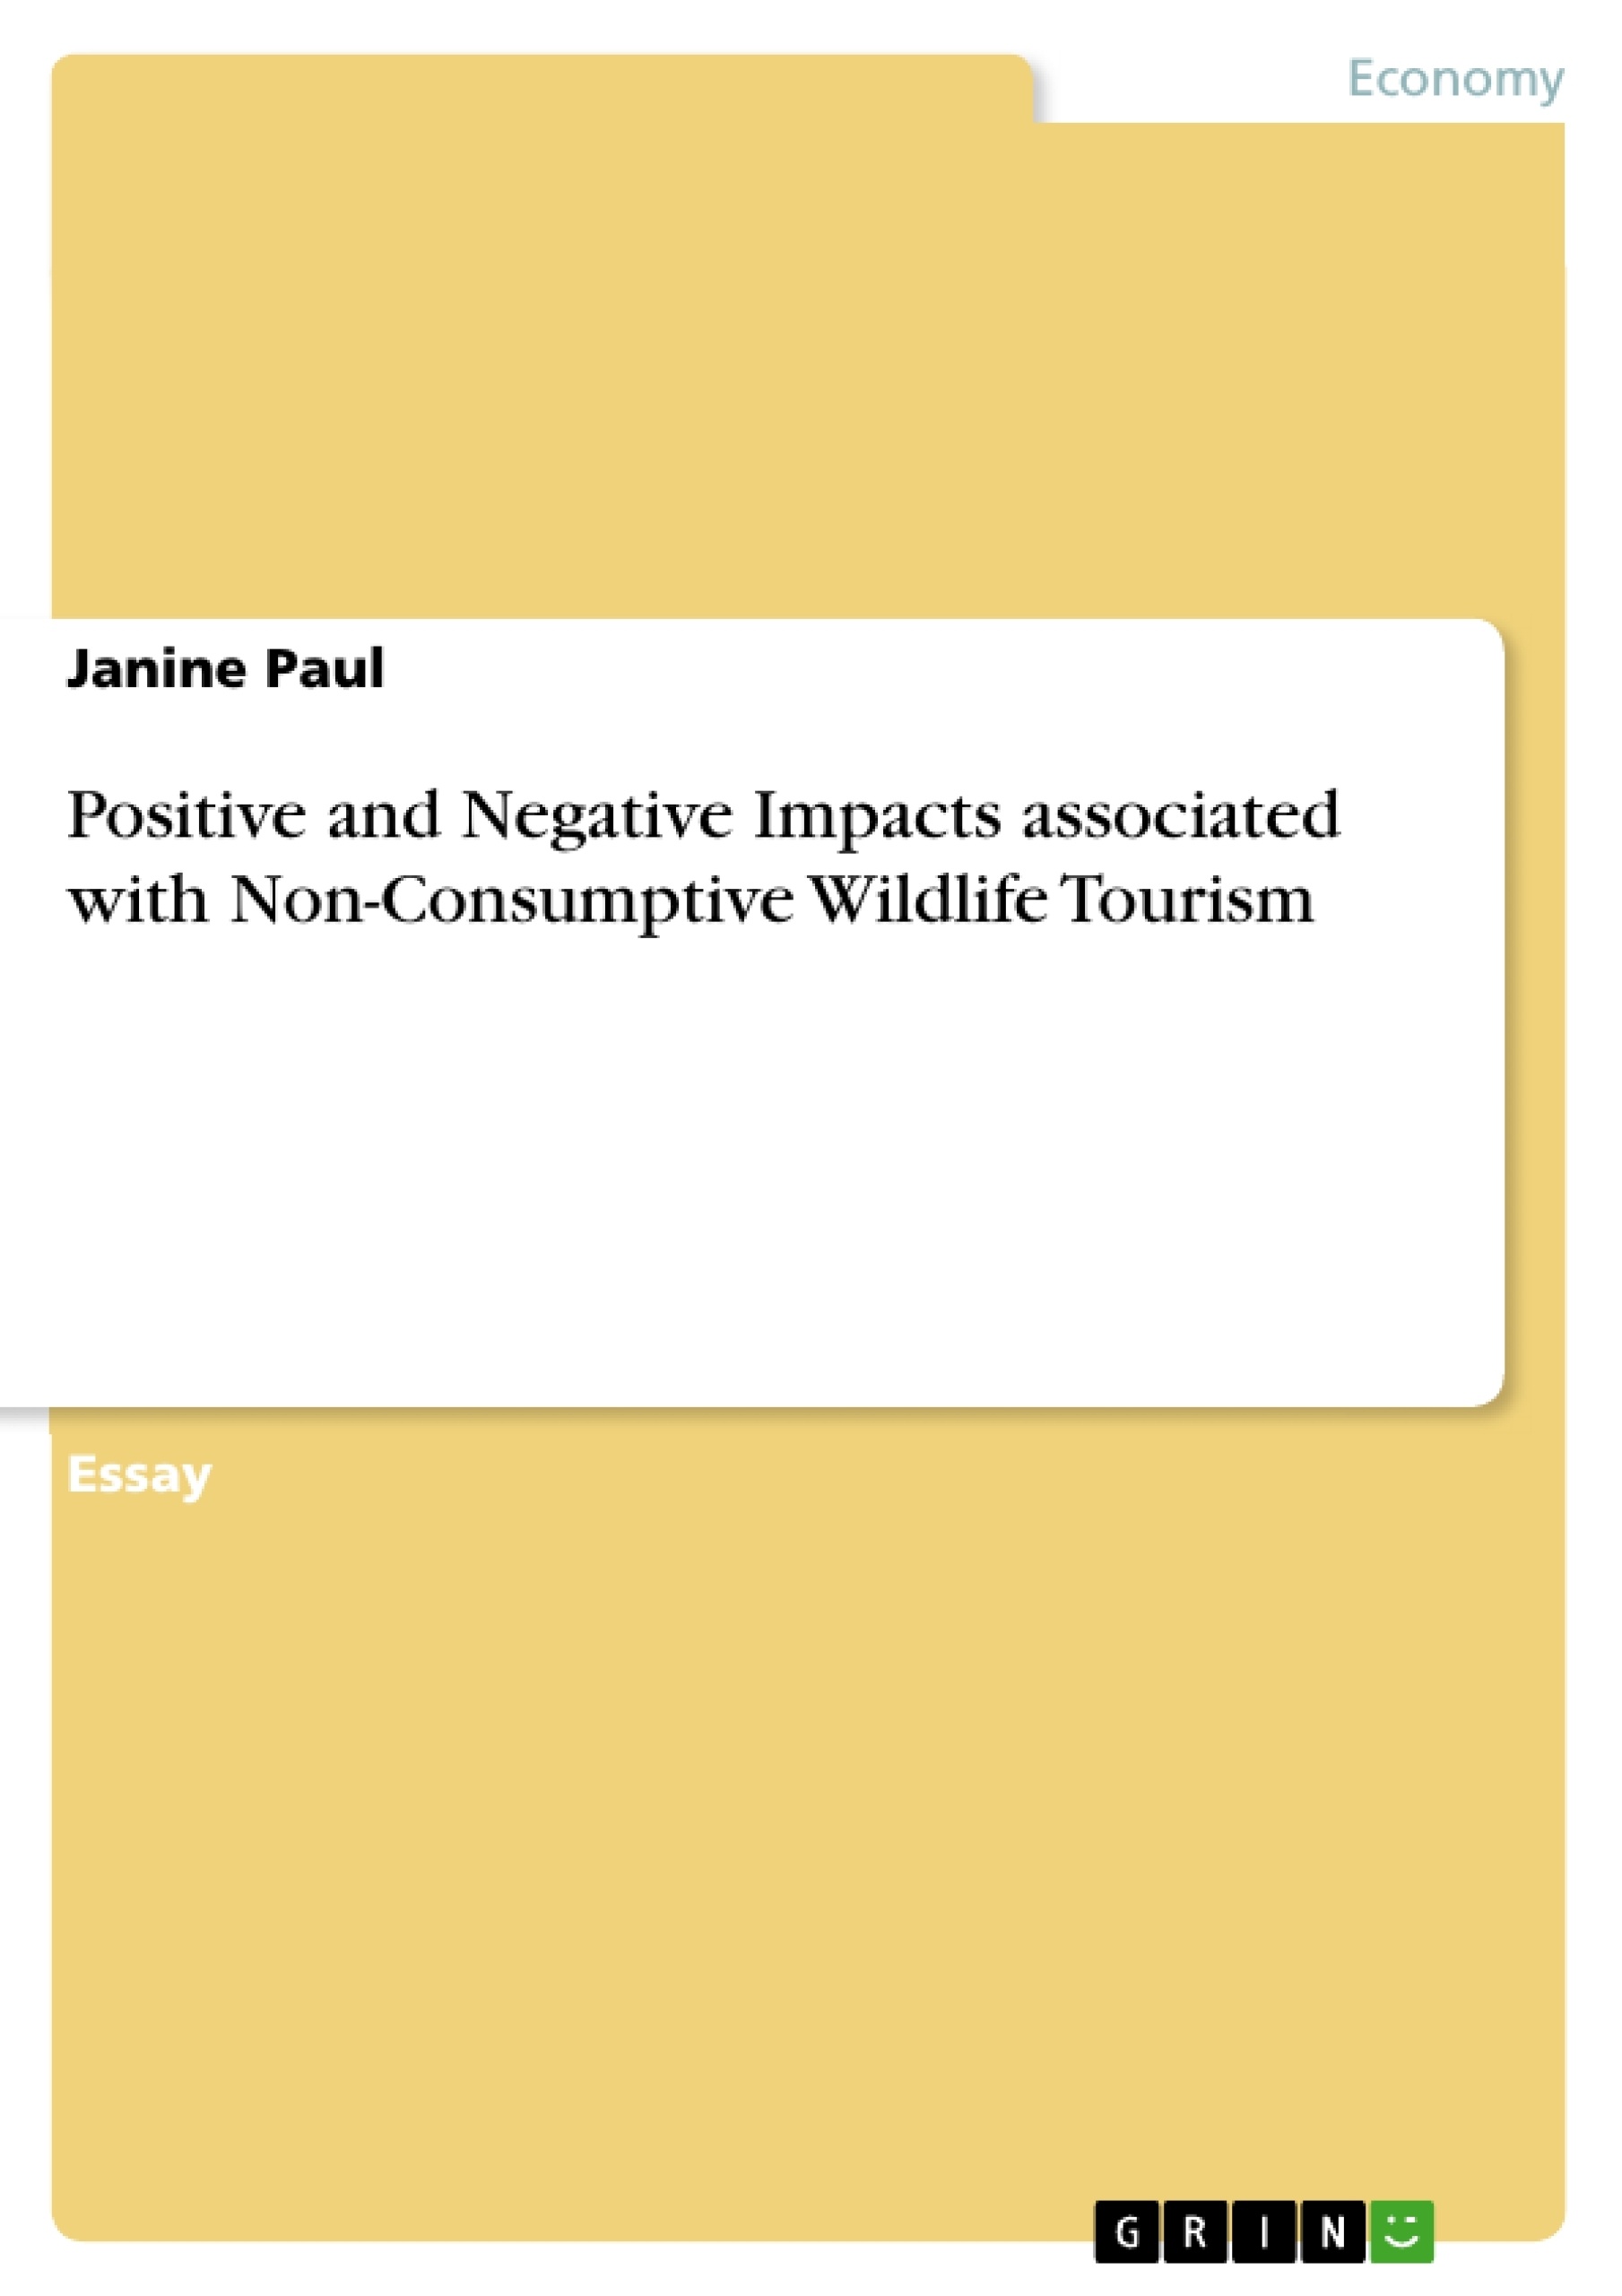 Effects of tourism on the environment essay